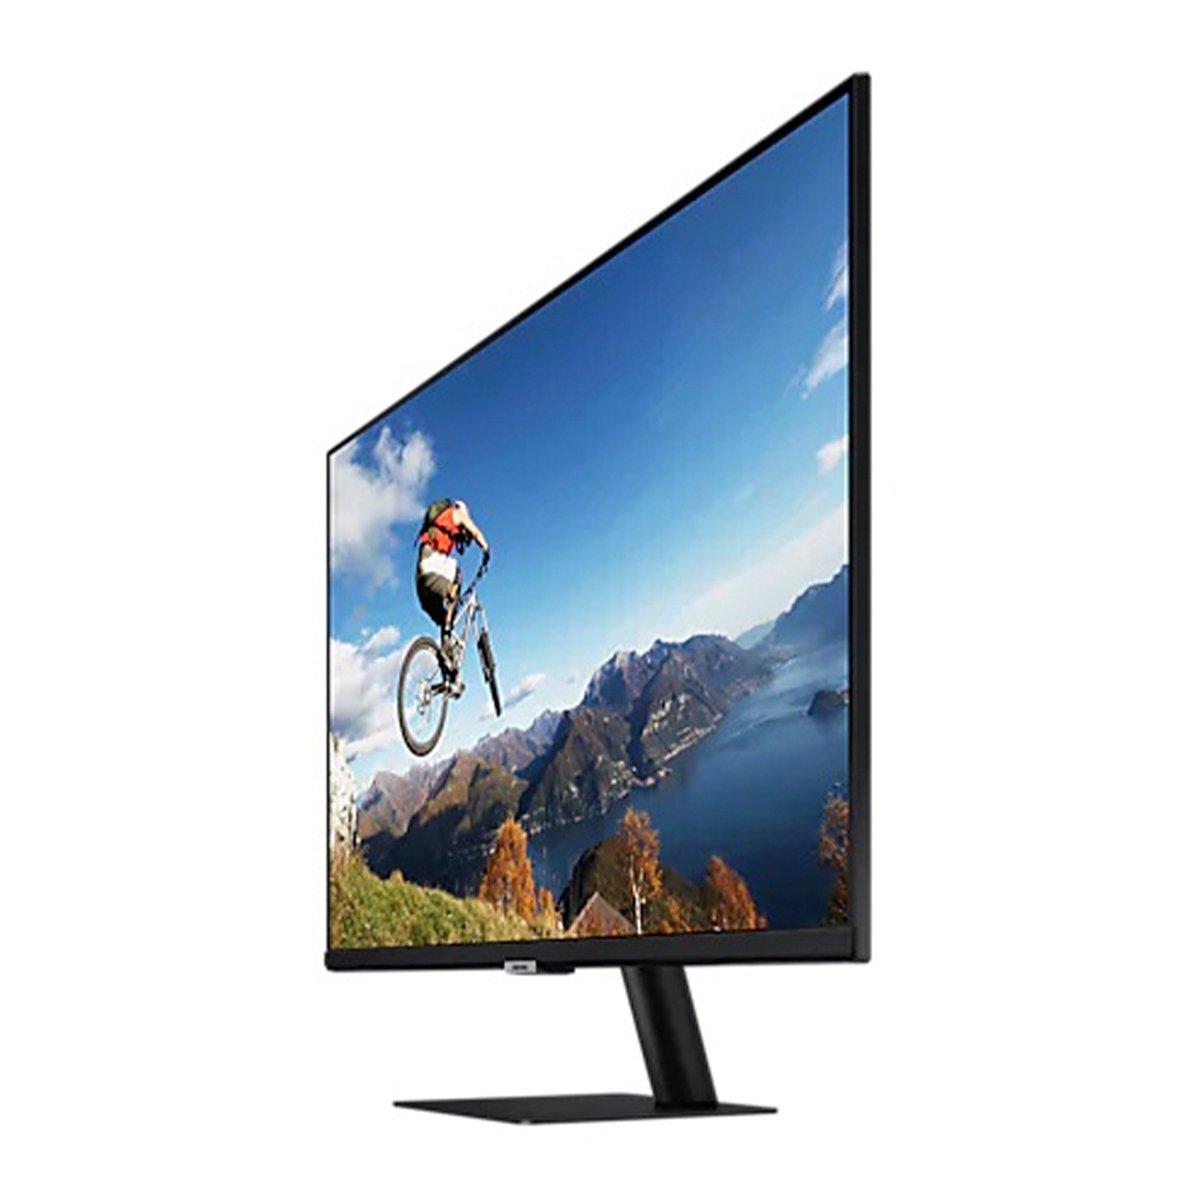 Samsung UHD Smart Monitor with Mobile Connectivity LS32AM700UMXUE - In-built speaker with Voice Assistant remote,USB-C and Wireless connectivity